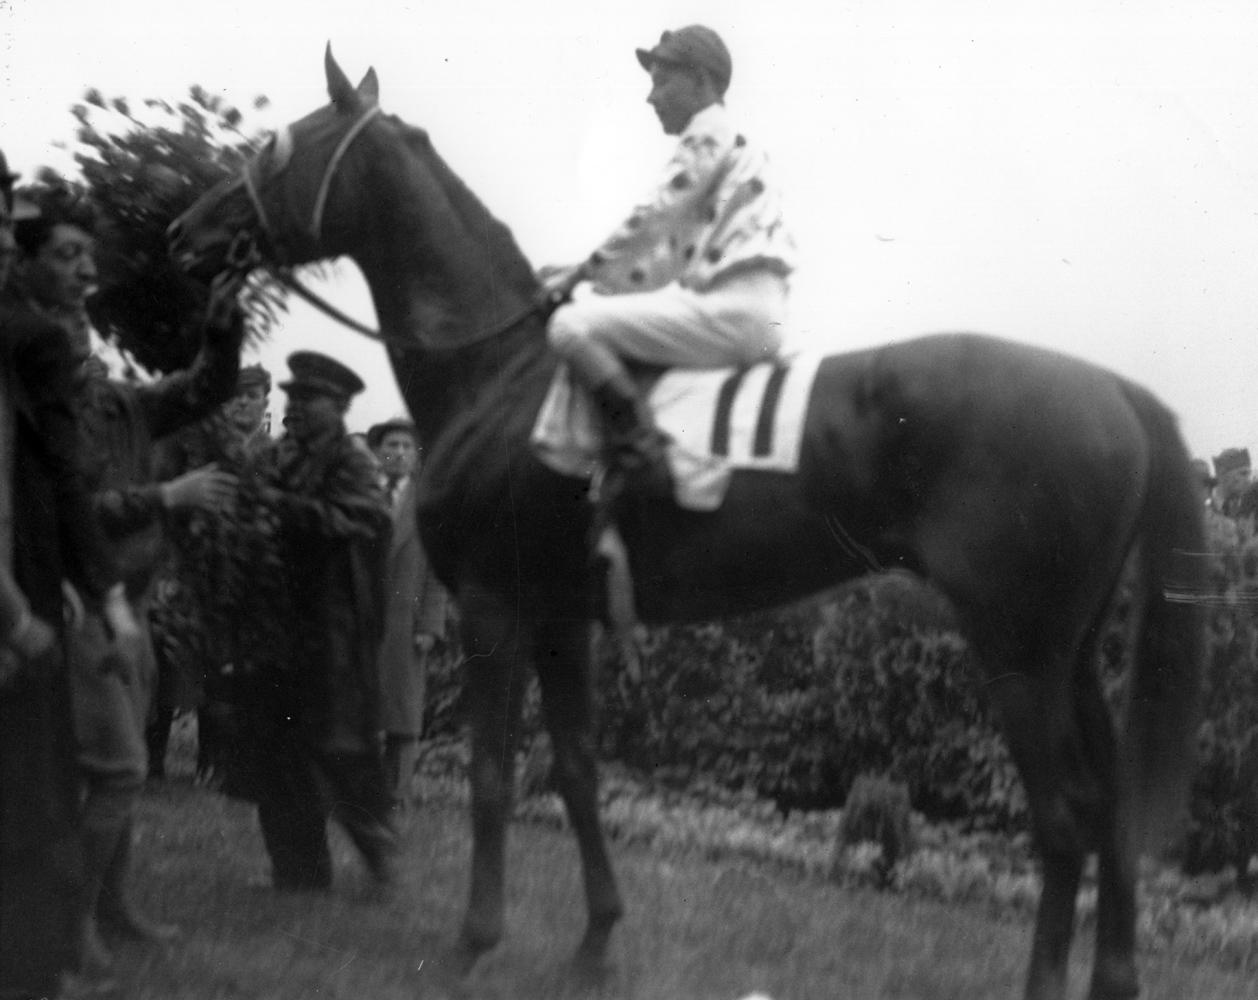 Omaha (Willie Saunders up) in the winner's circle for the 1935 Kentucky Derby (Churchill Downs Inc./Kinetic Corp. /Museum Collection)